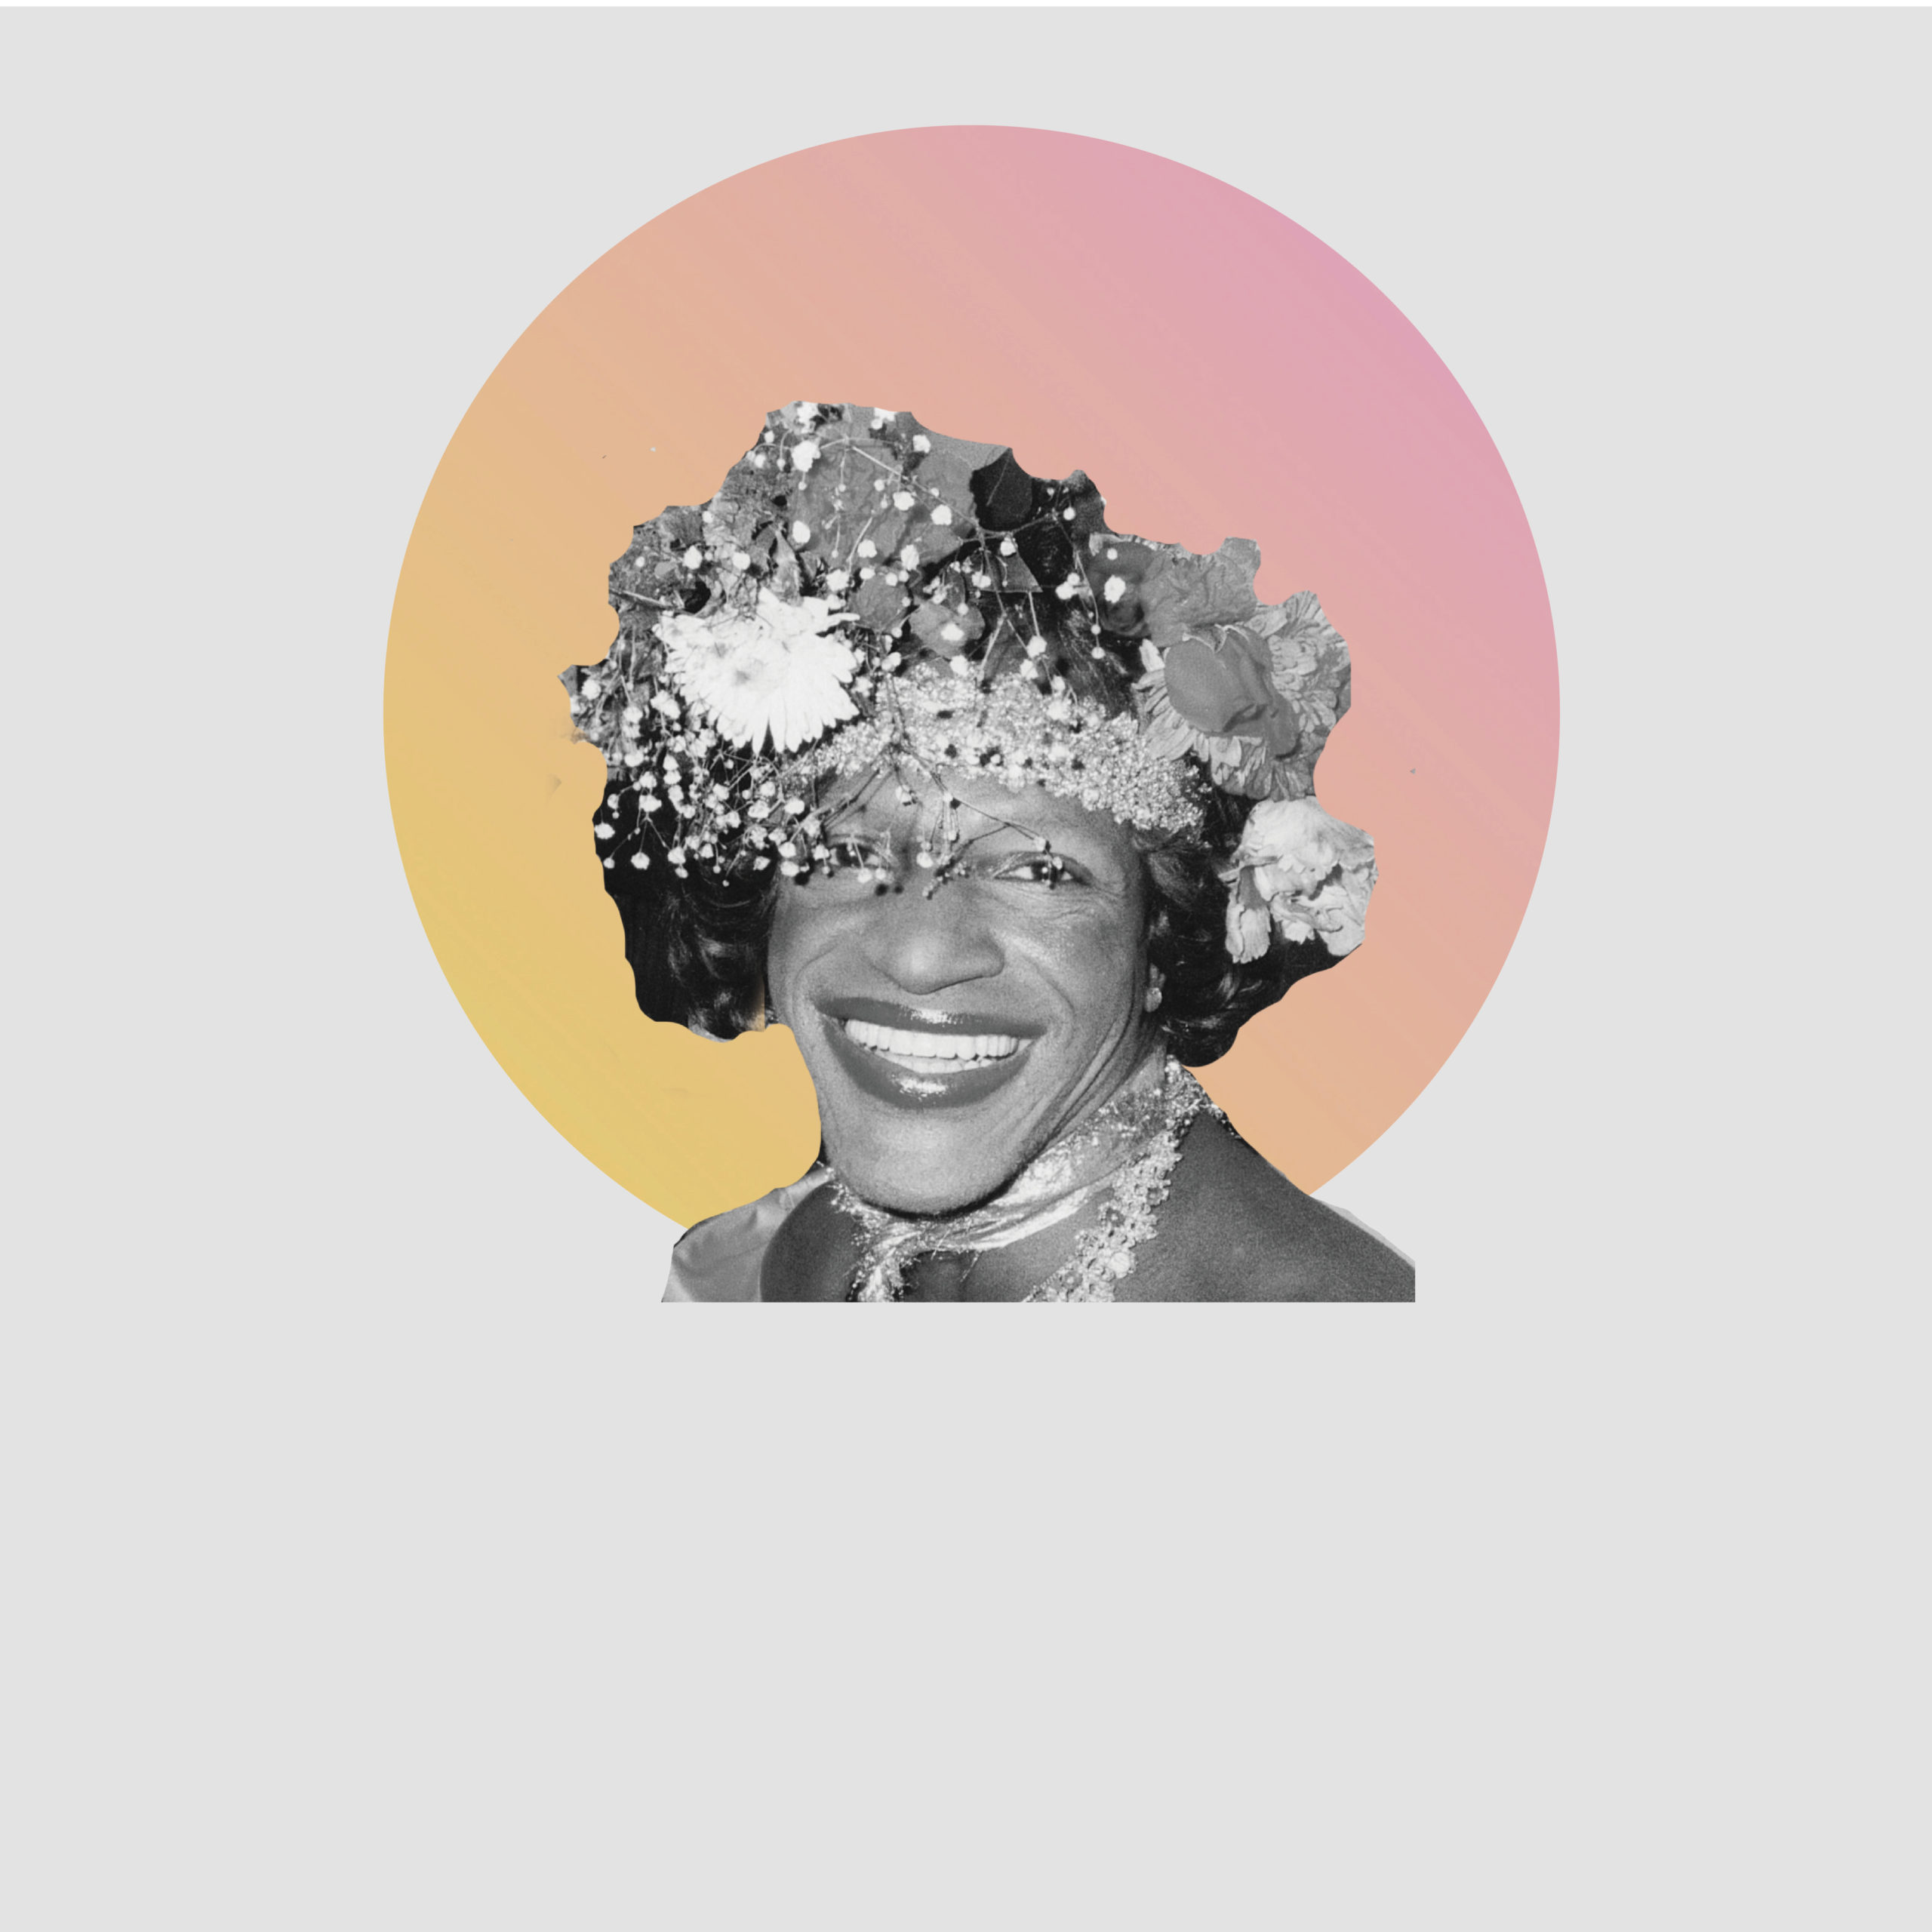 Picture of Marsha P. Johnson on a gray background.